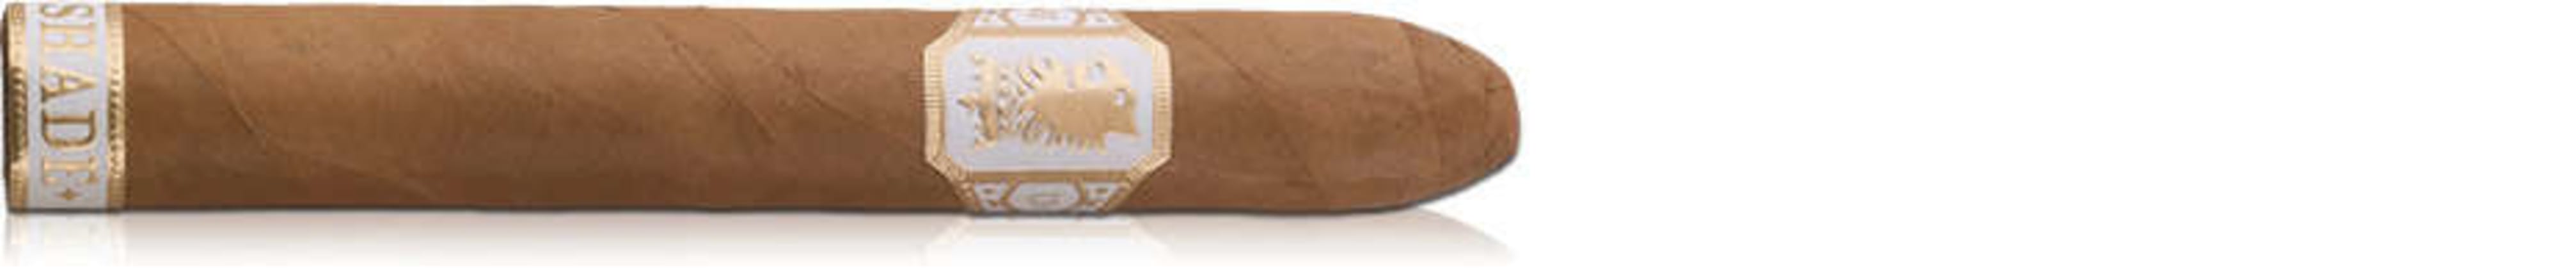 Undercrown Shade Belicoso Single